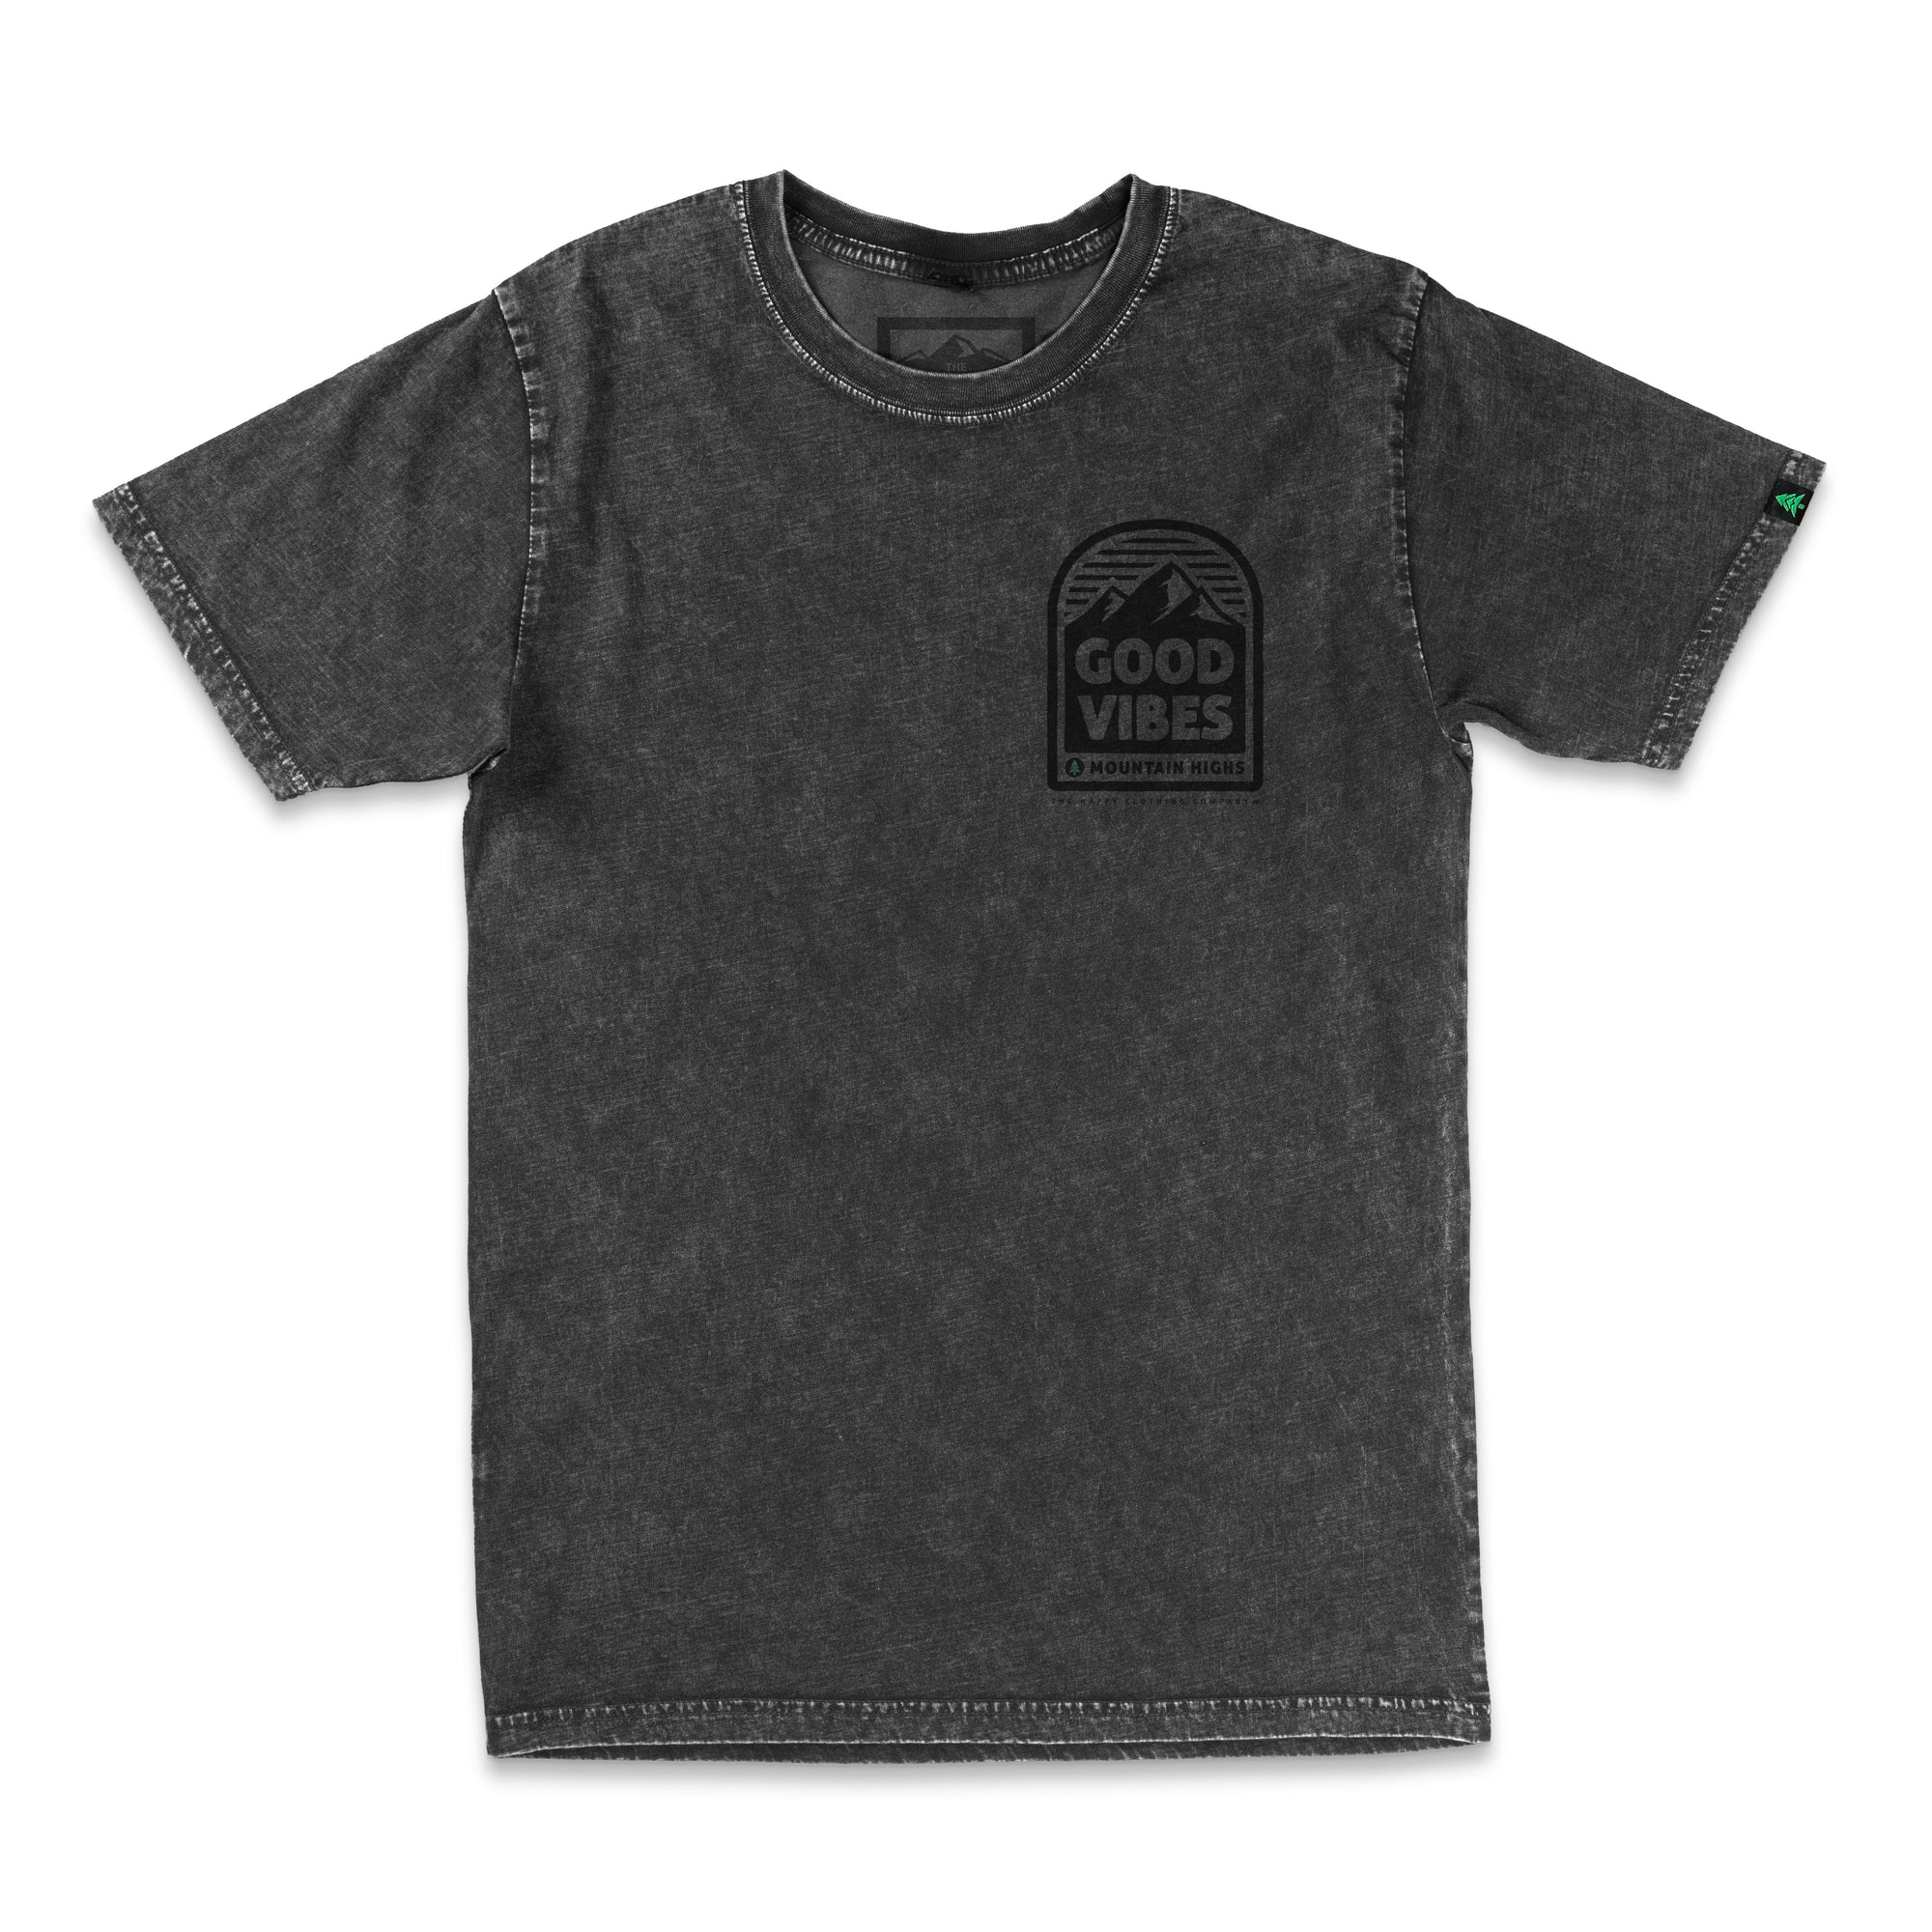 Good Vibes & Mountain Highs Back Print Lightweight Stone Wash Cotton Tee